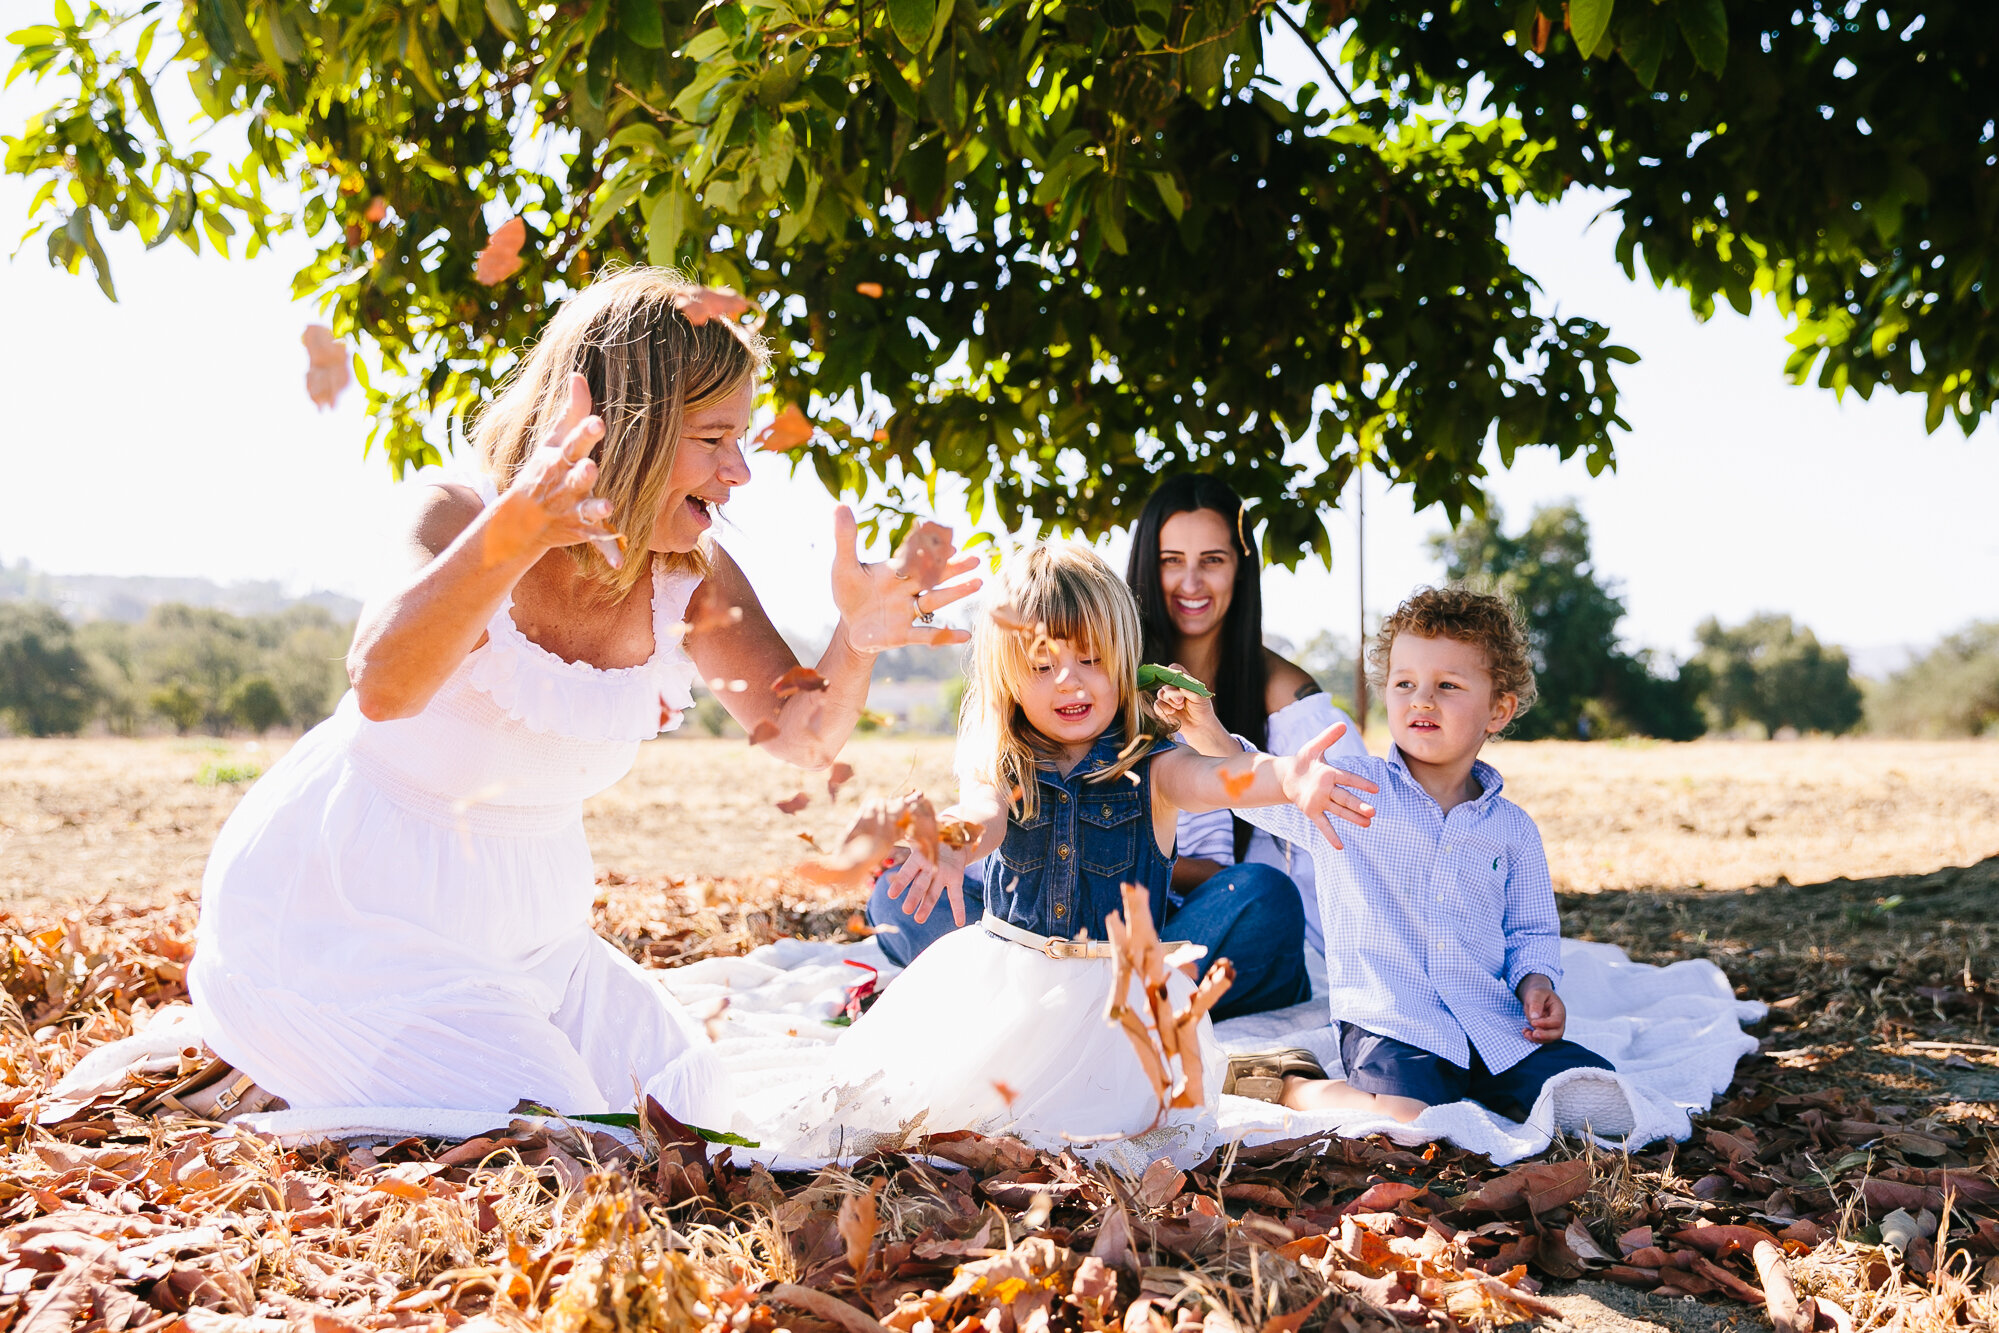 Los_Angeles_Family_Photography_Orange_County_Children_Babies_Field_Farm_Outdoors_Morning_Session_California_Girls_Boys_Kids_Photography-1246.jpg